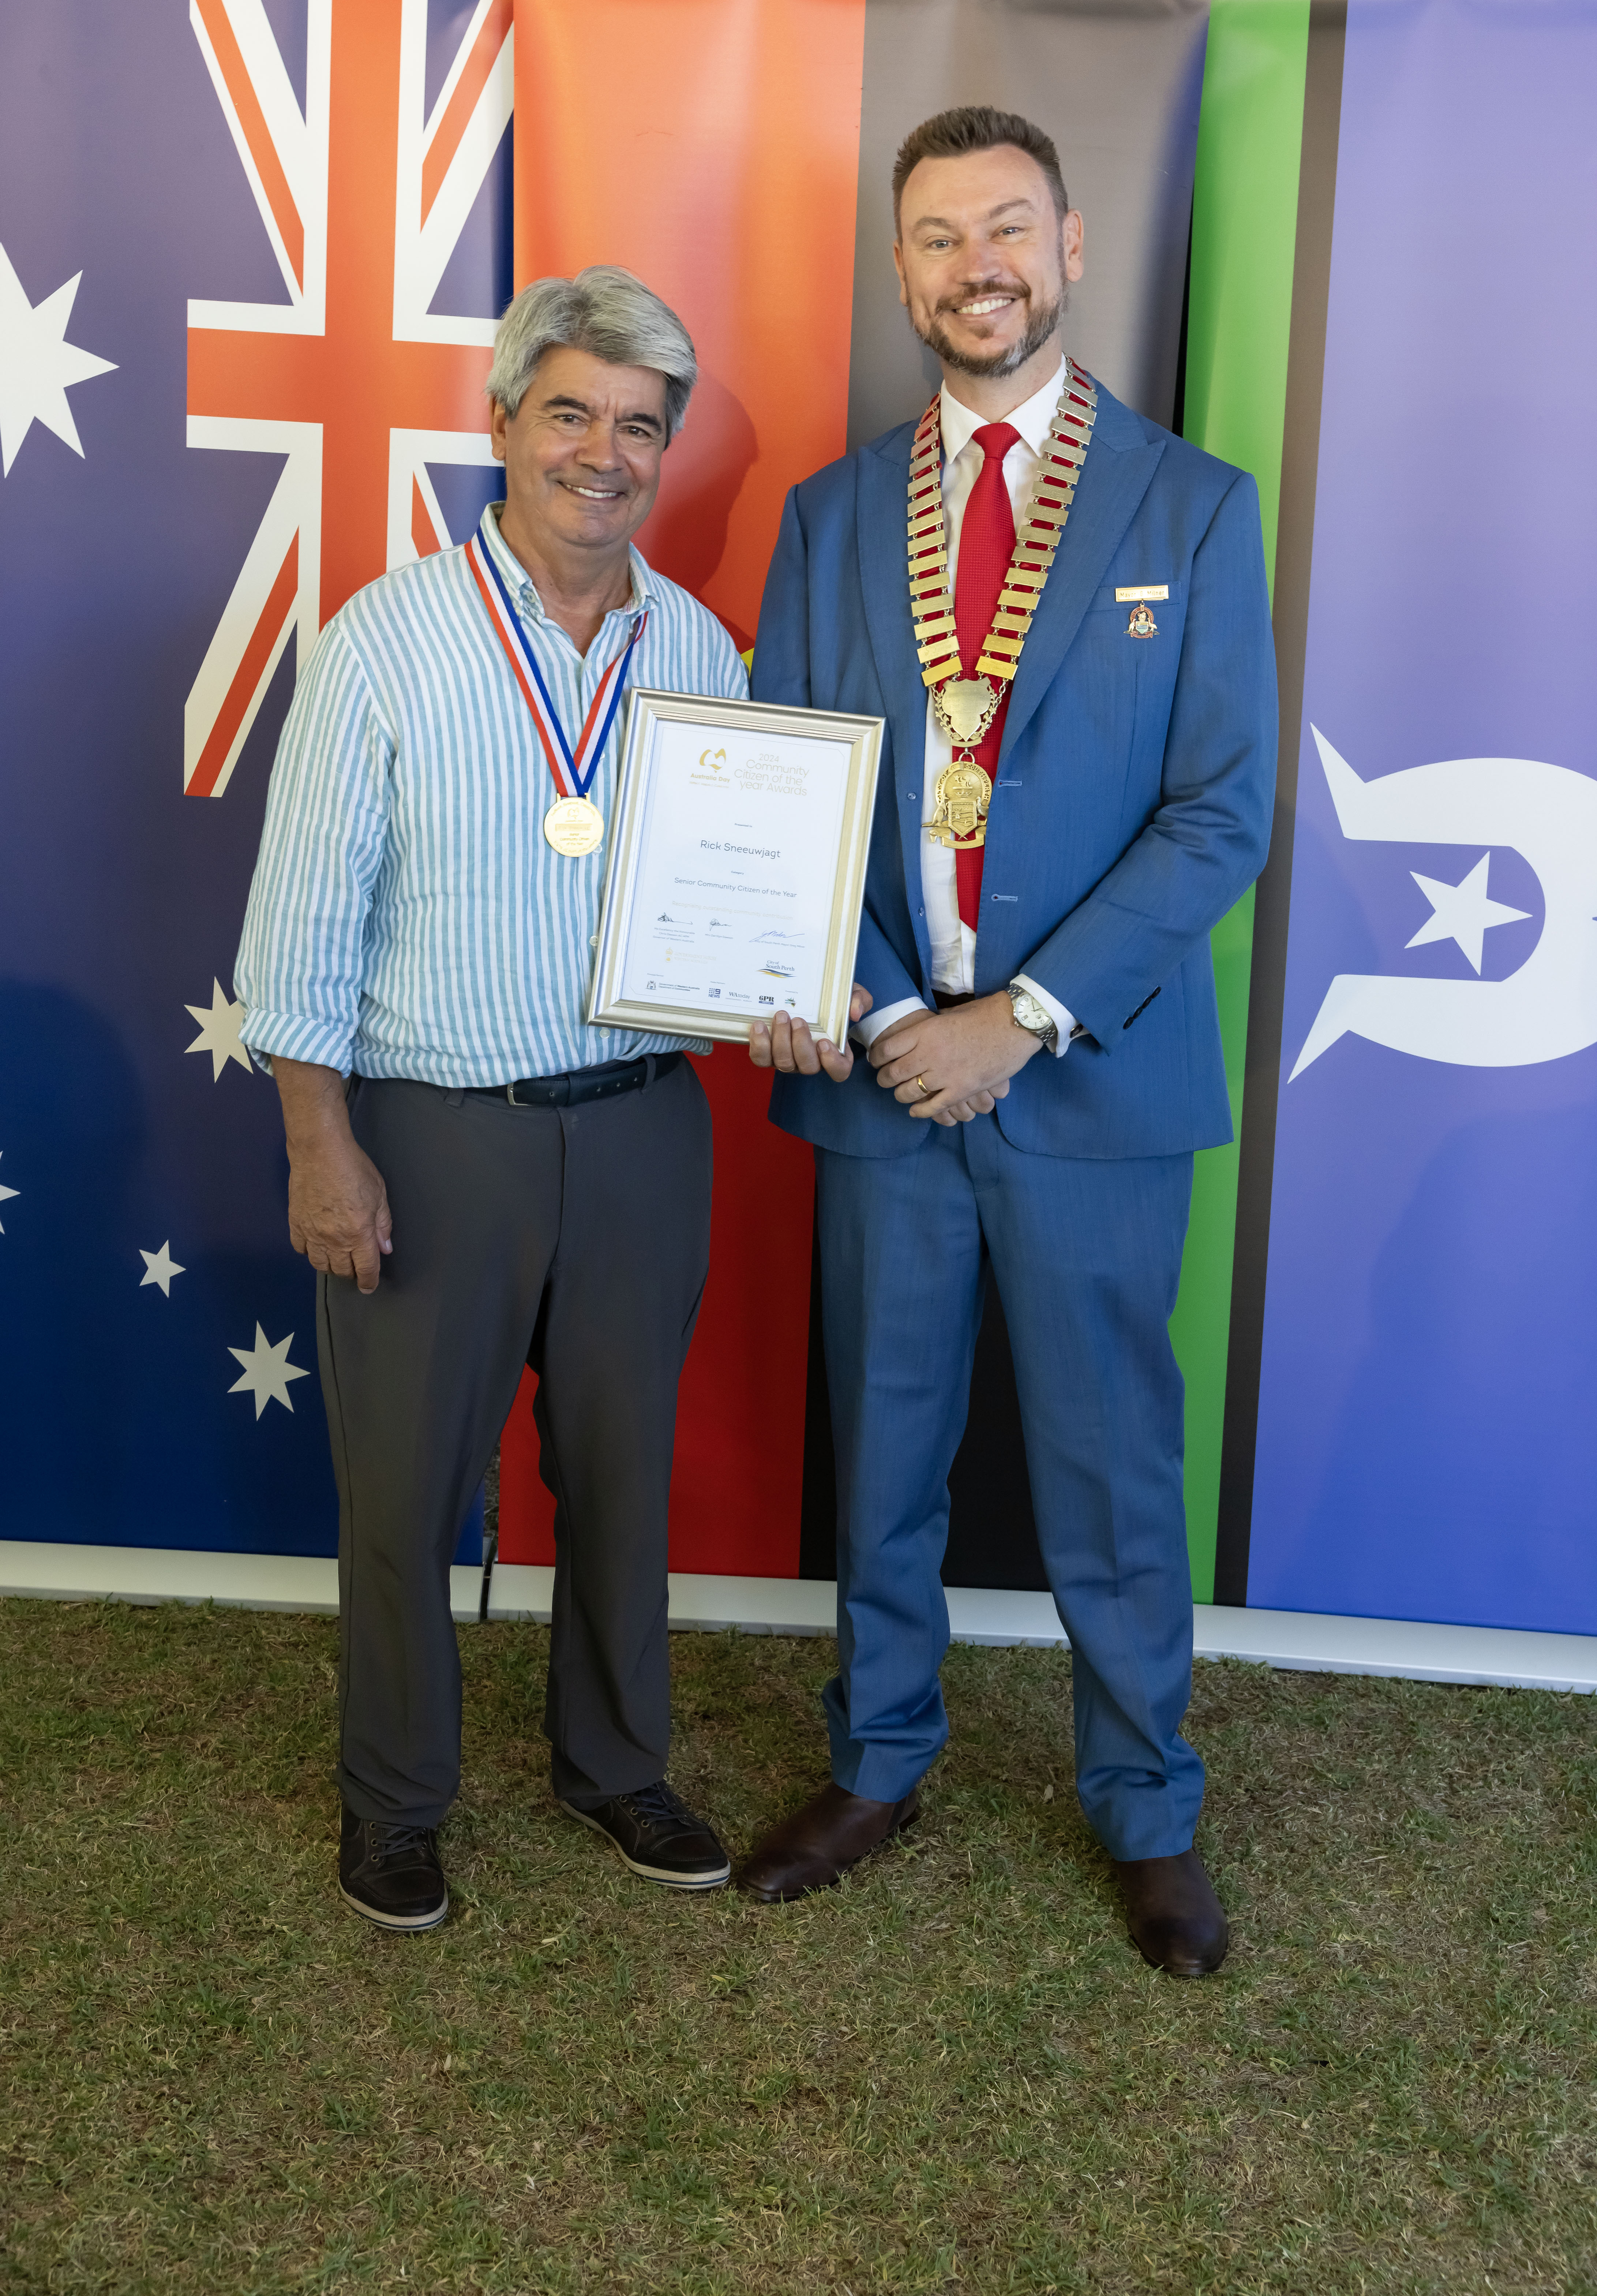 Two men smiling and holding a framed certificate.